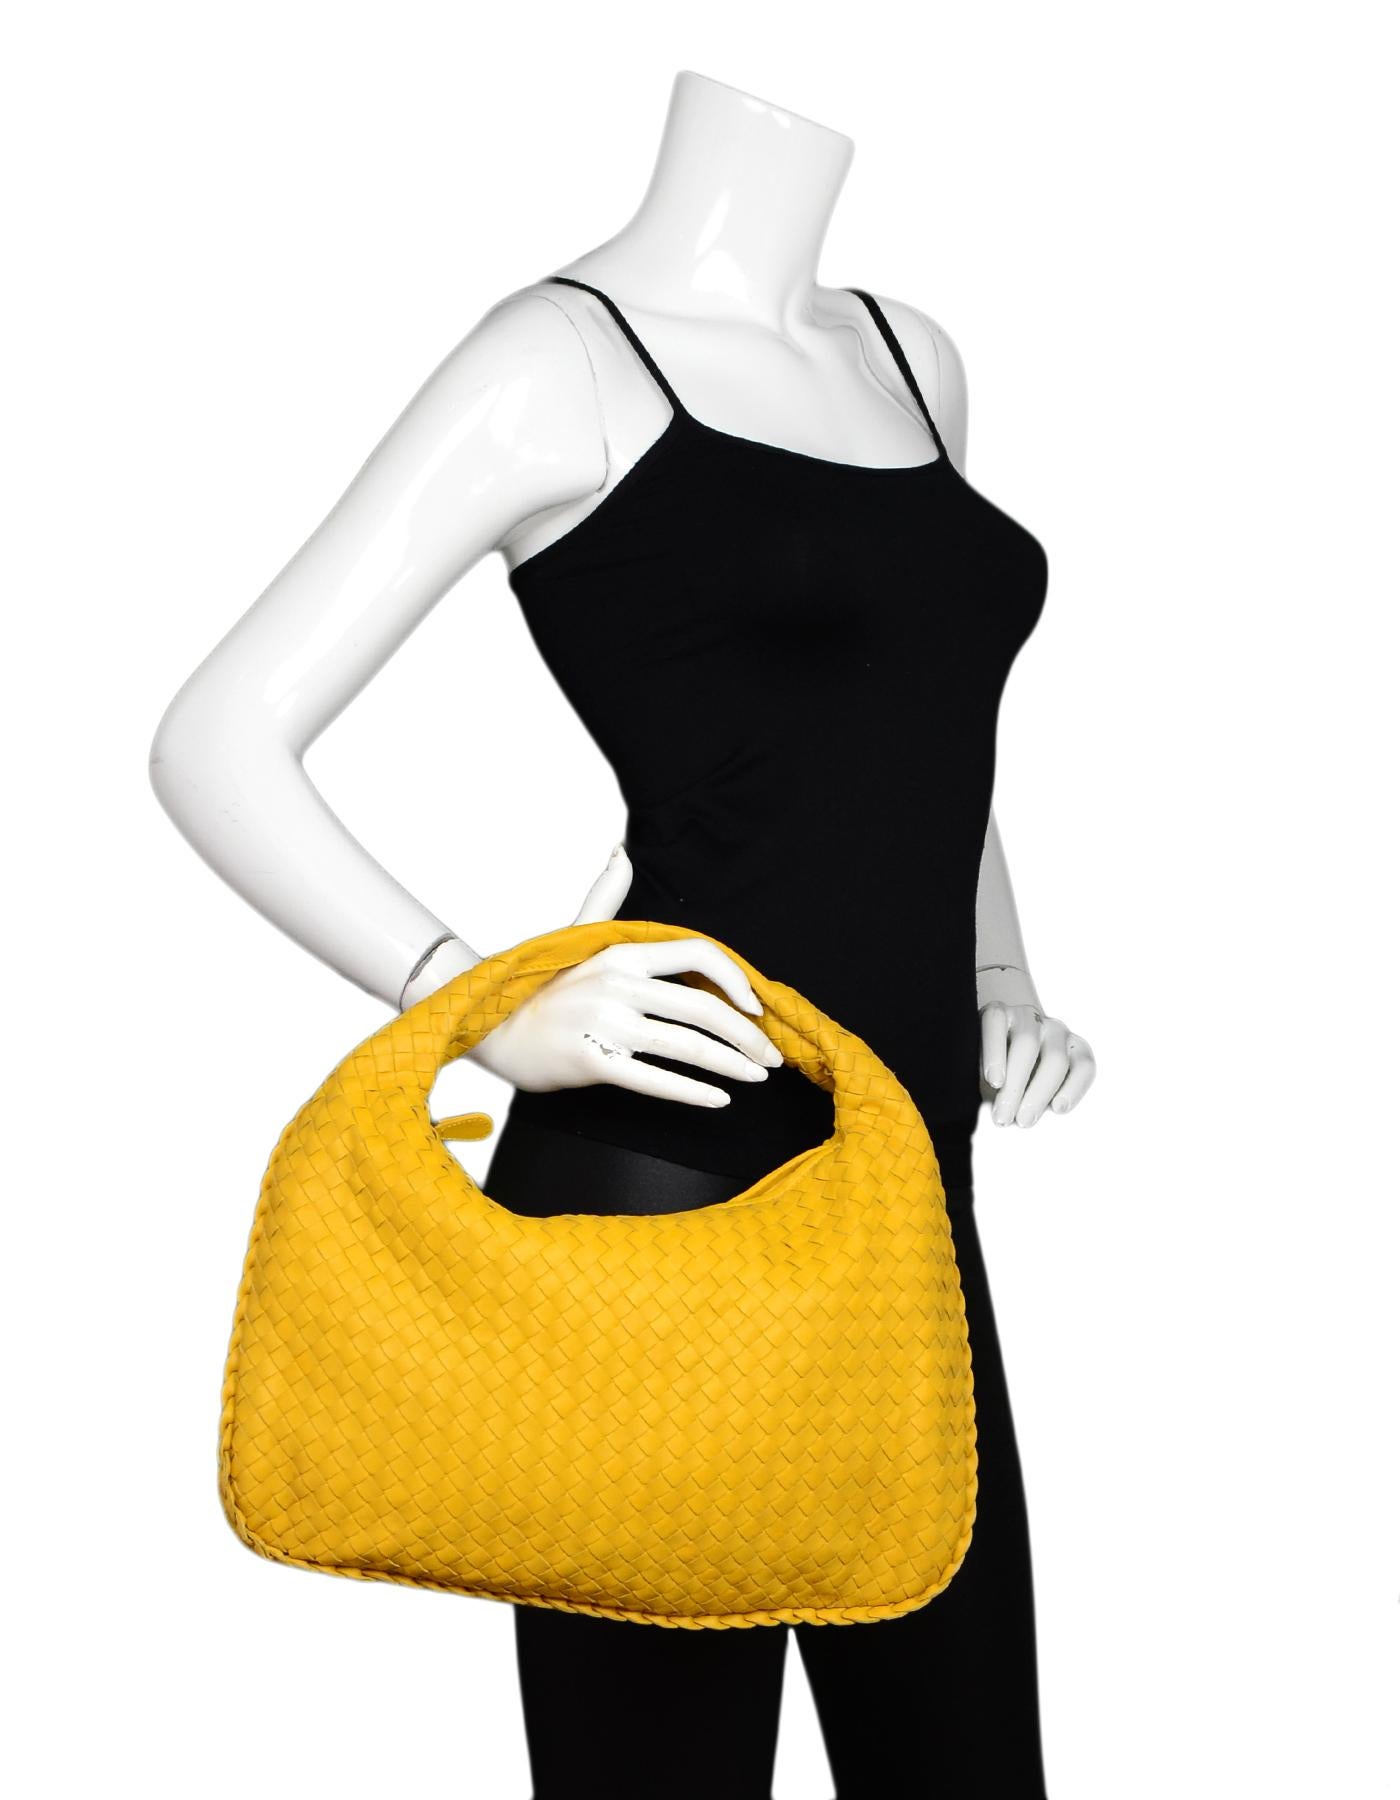 Bottega Veneta Yellow Woven Leather Nappa Intrecciato Medium Veneta Hobo Bag

Made In: Italy
Color: Yellow
Hardware: Black
Materials: Leather
Lining: Brown suede
Closure/Opening: Zip top
Exterior Pockets: None
Interior Pockets: One zippered wall